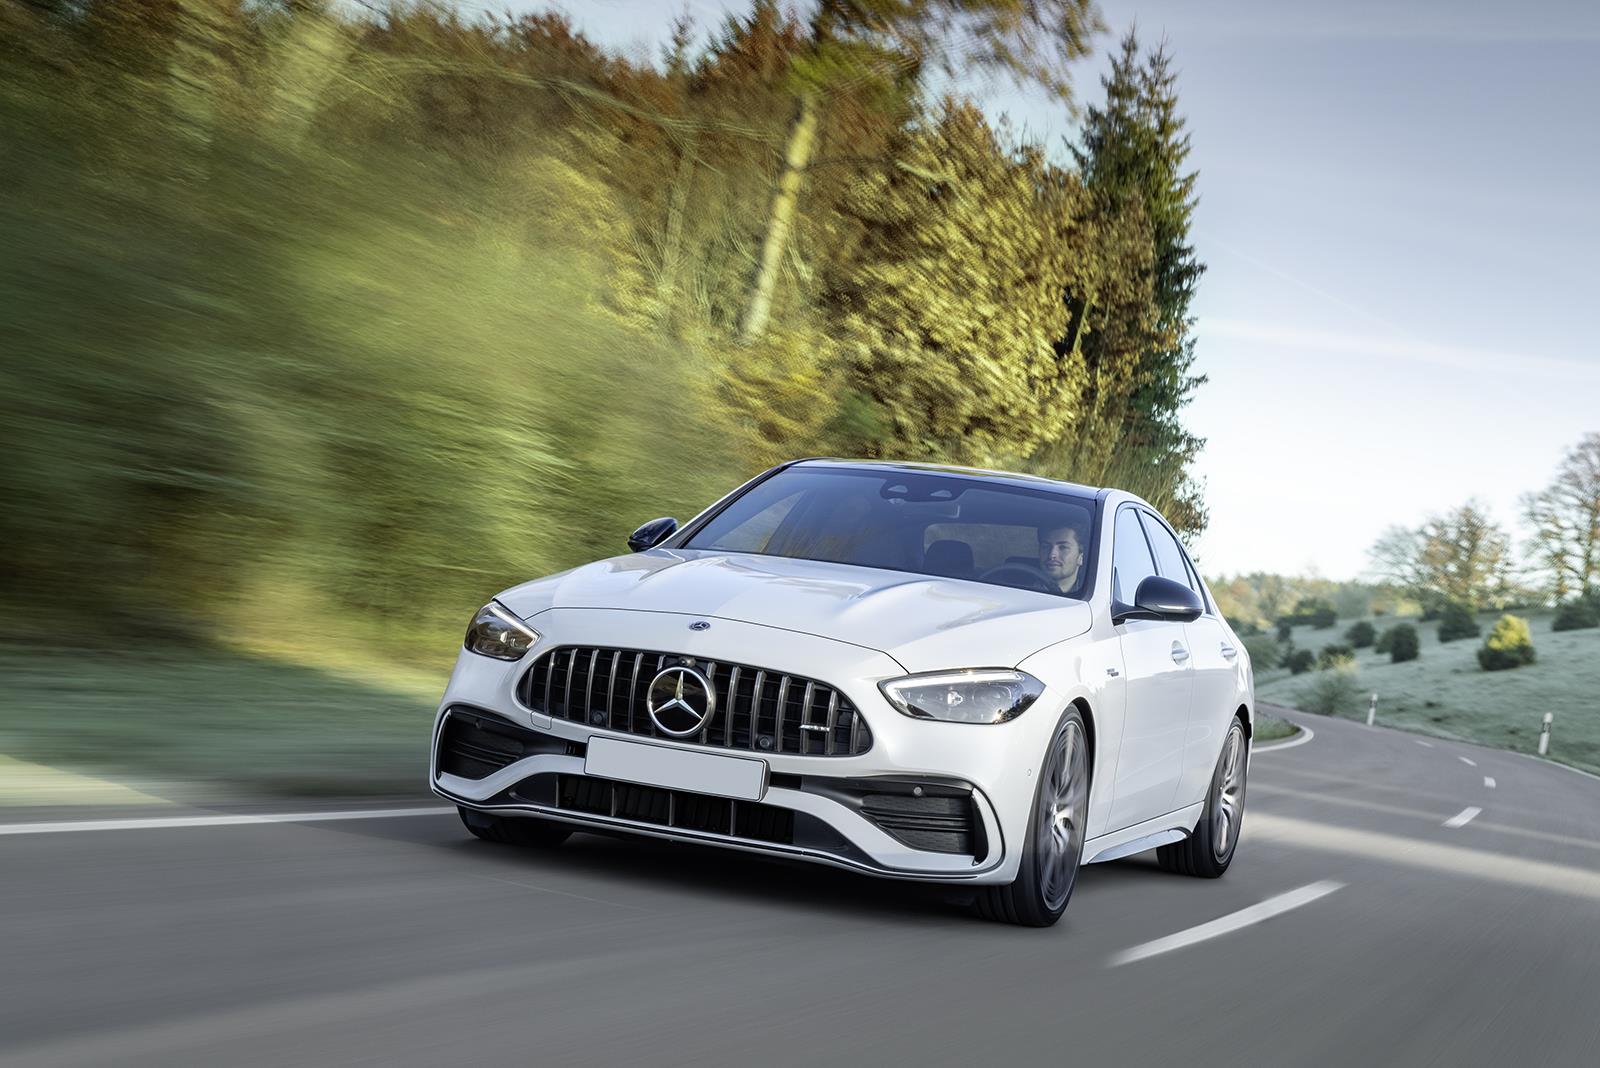 what is the mercedes-amg c-class top speed?